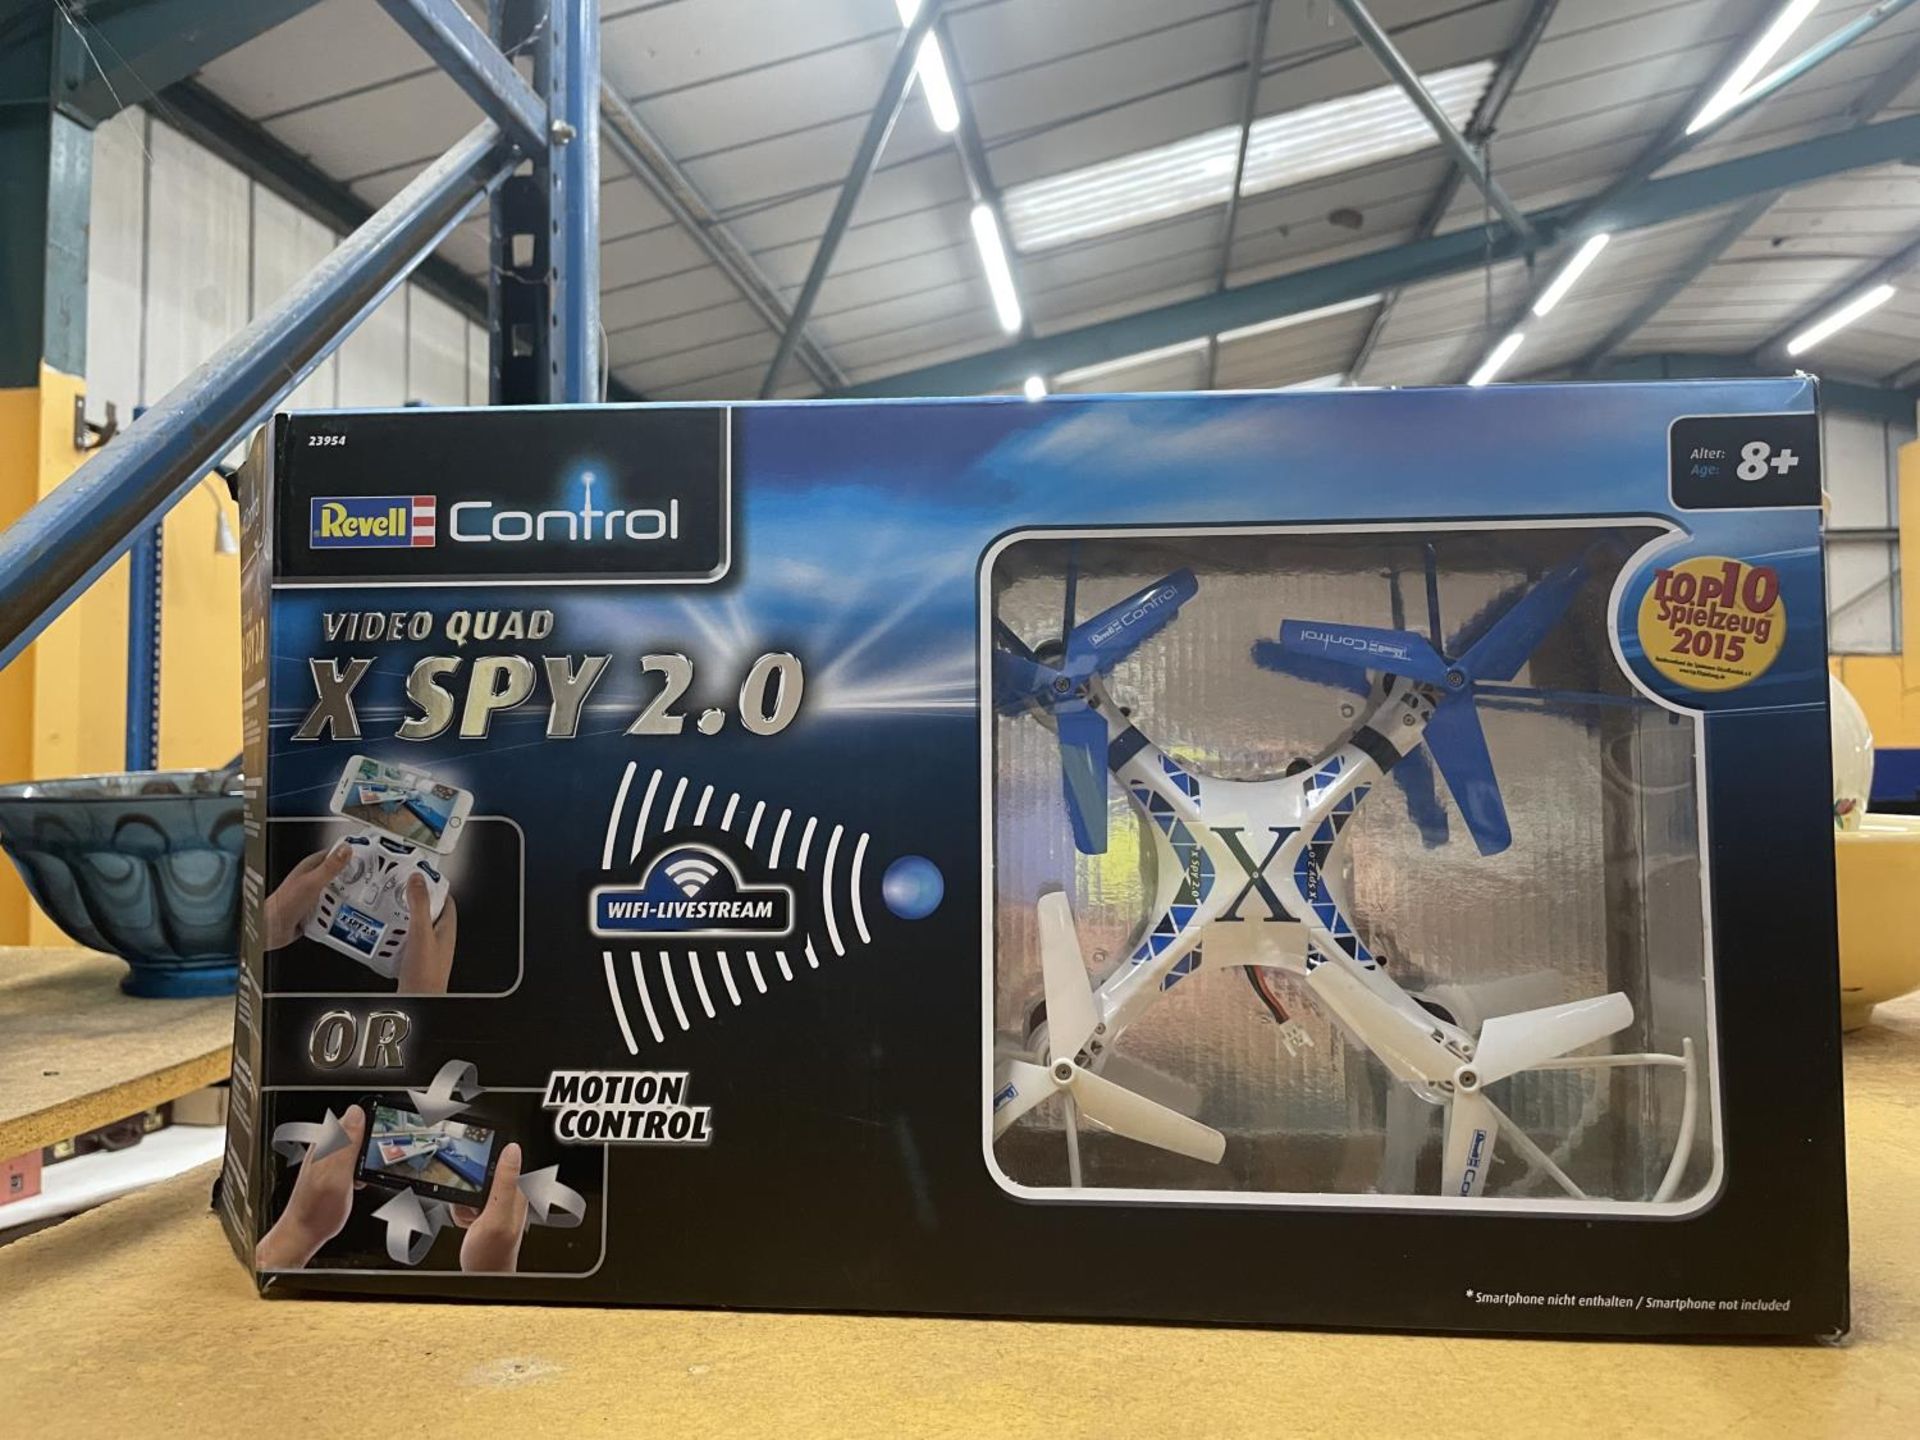 A REVELL CONTROL VIDEO QUAD X SPY 2.0 DRONE - BOXED